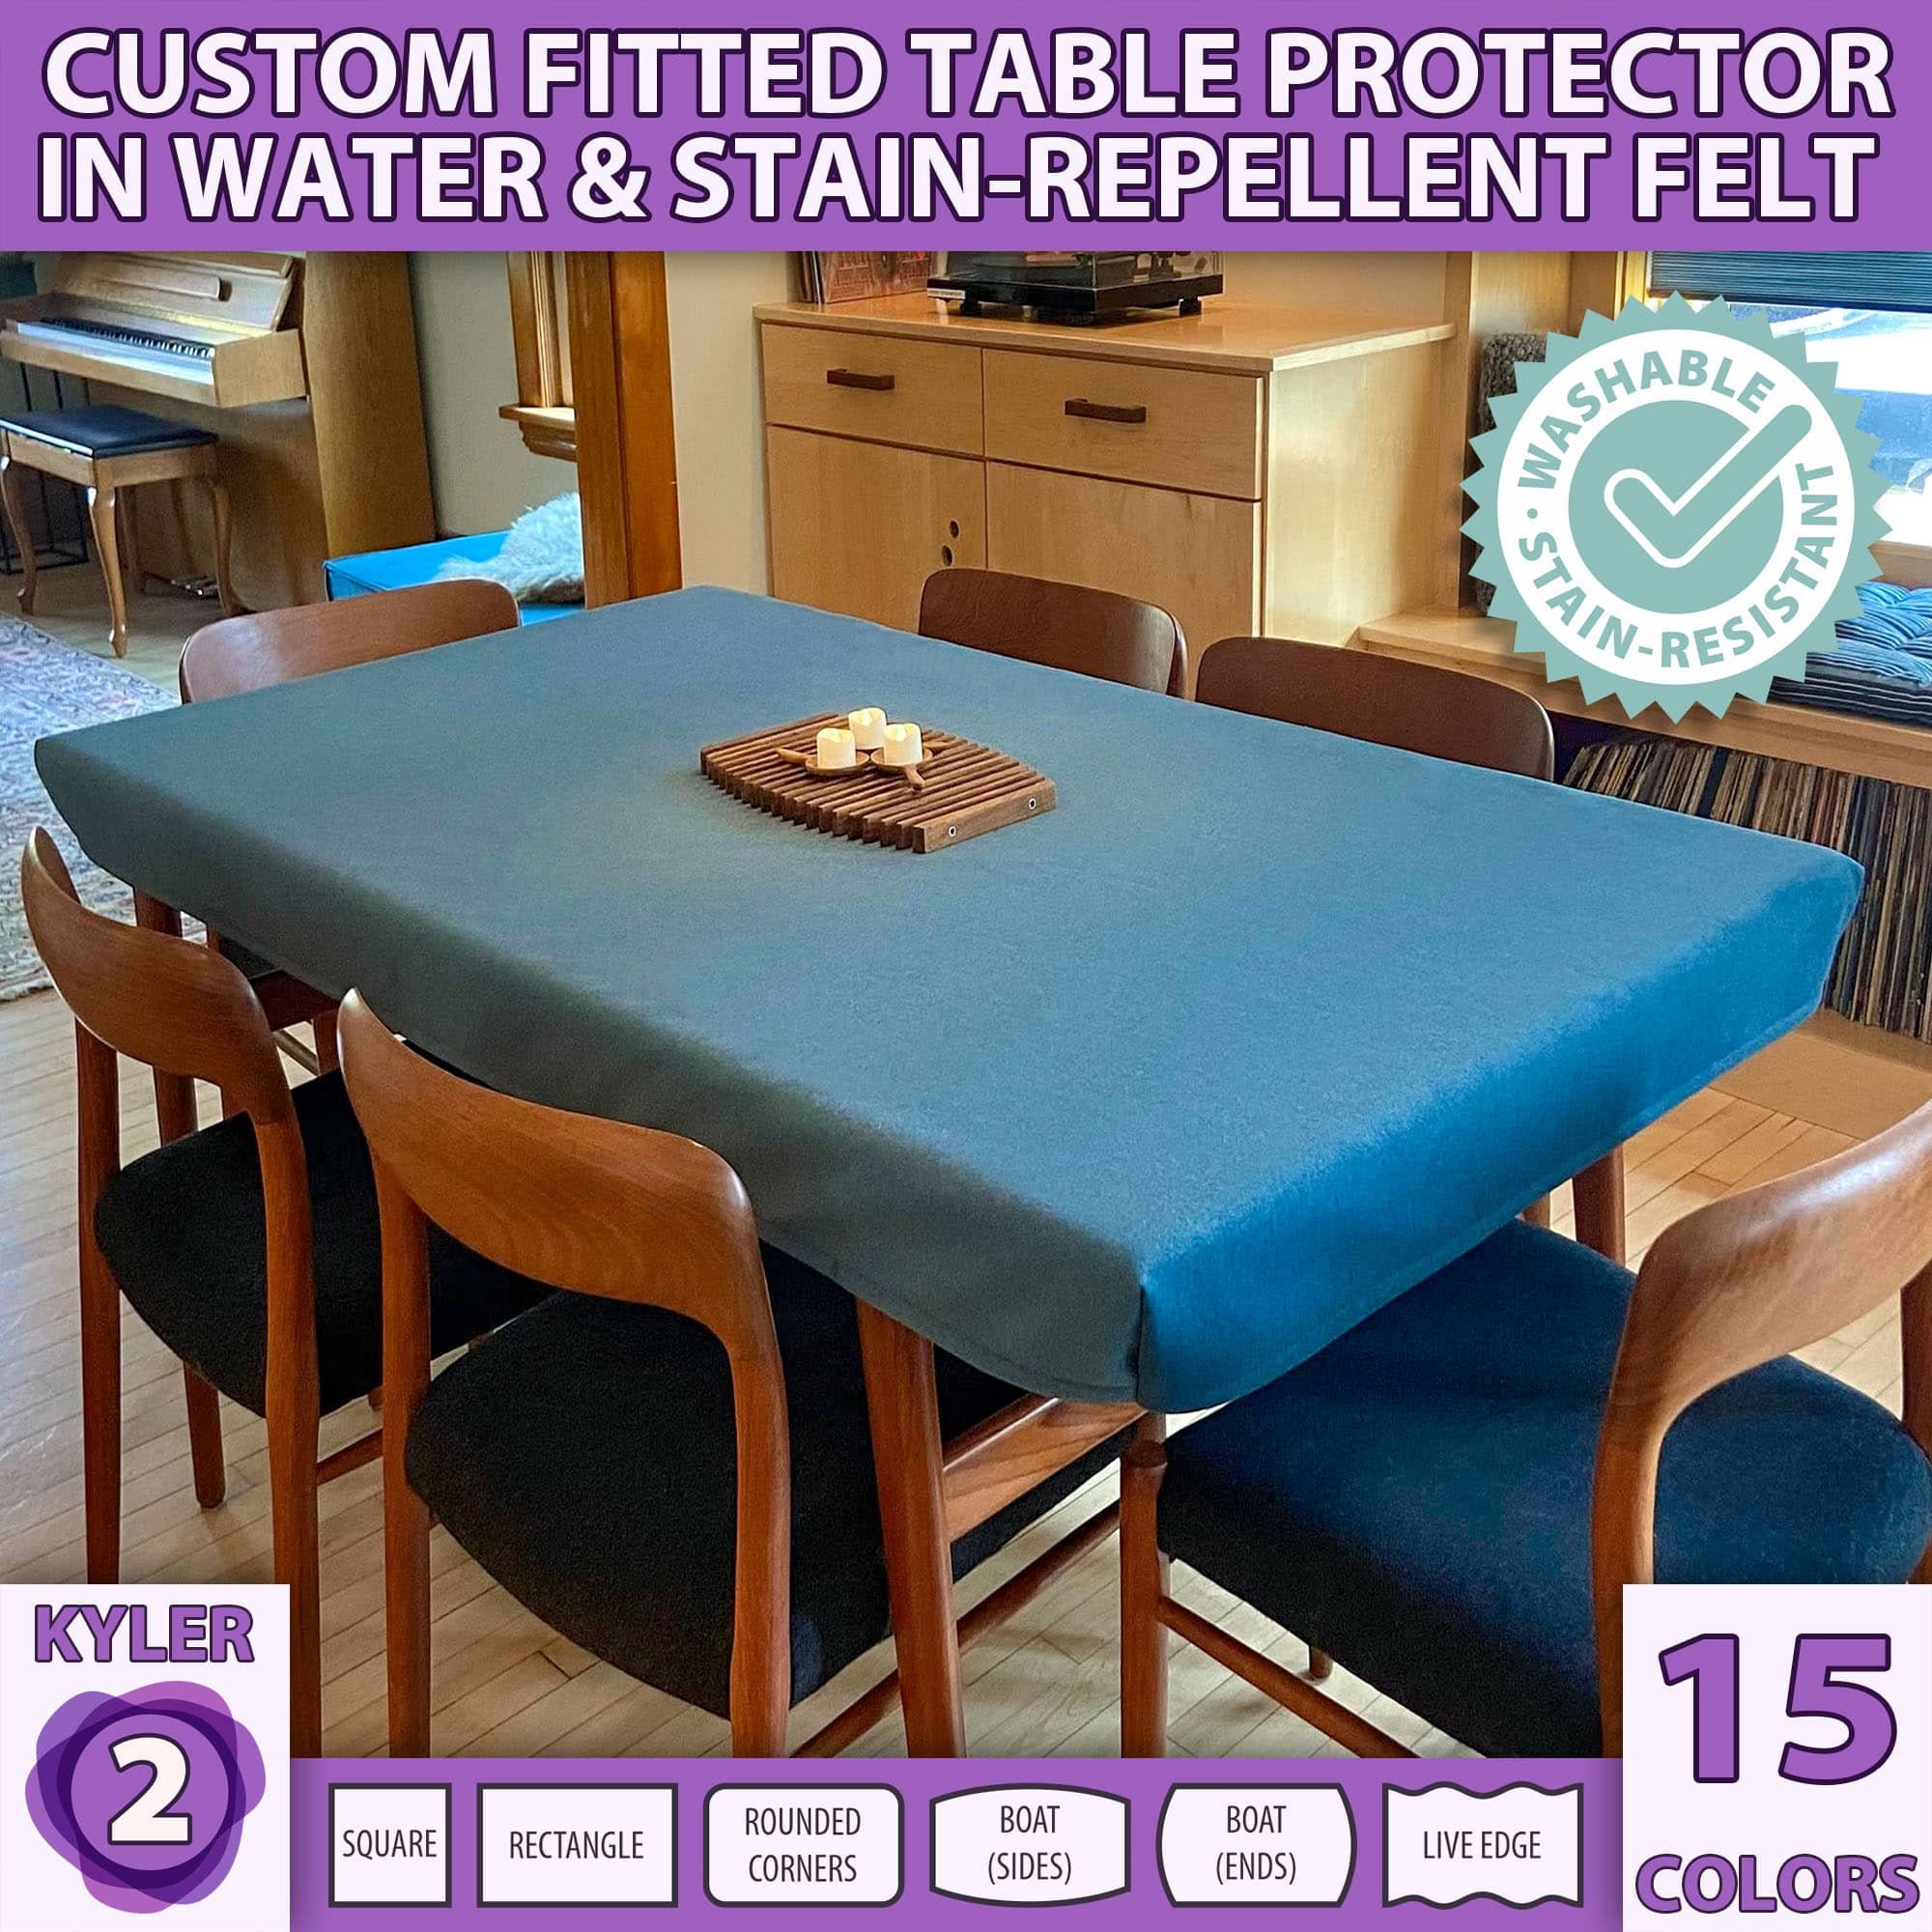 Brown Heat Resistant Table Protector Felt Backed Wipe clean Water proof  Cover, Round, Square, Rectangle or Oval approx 3mm Thick